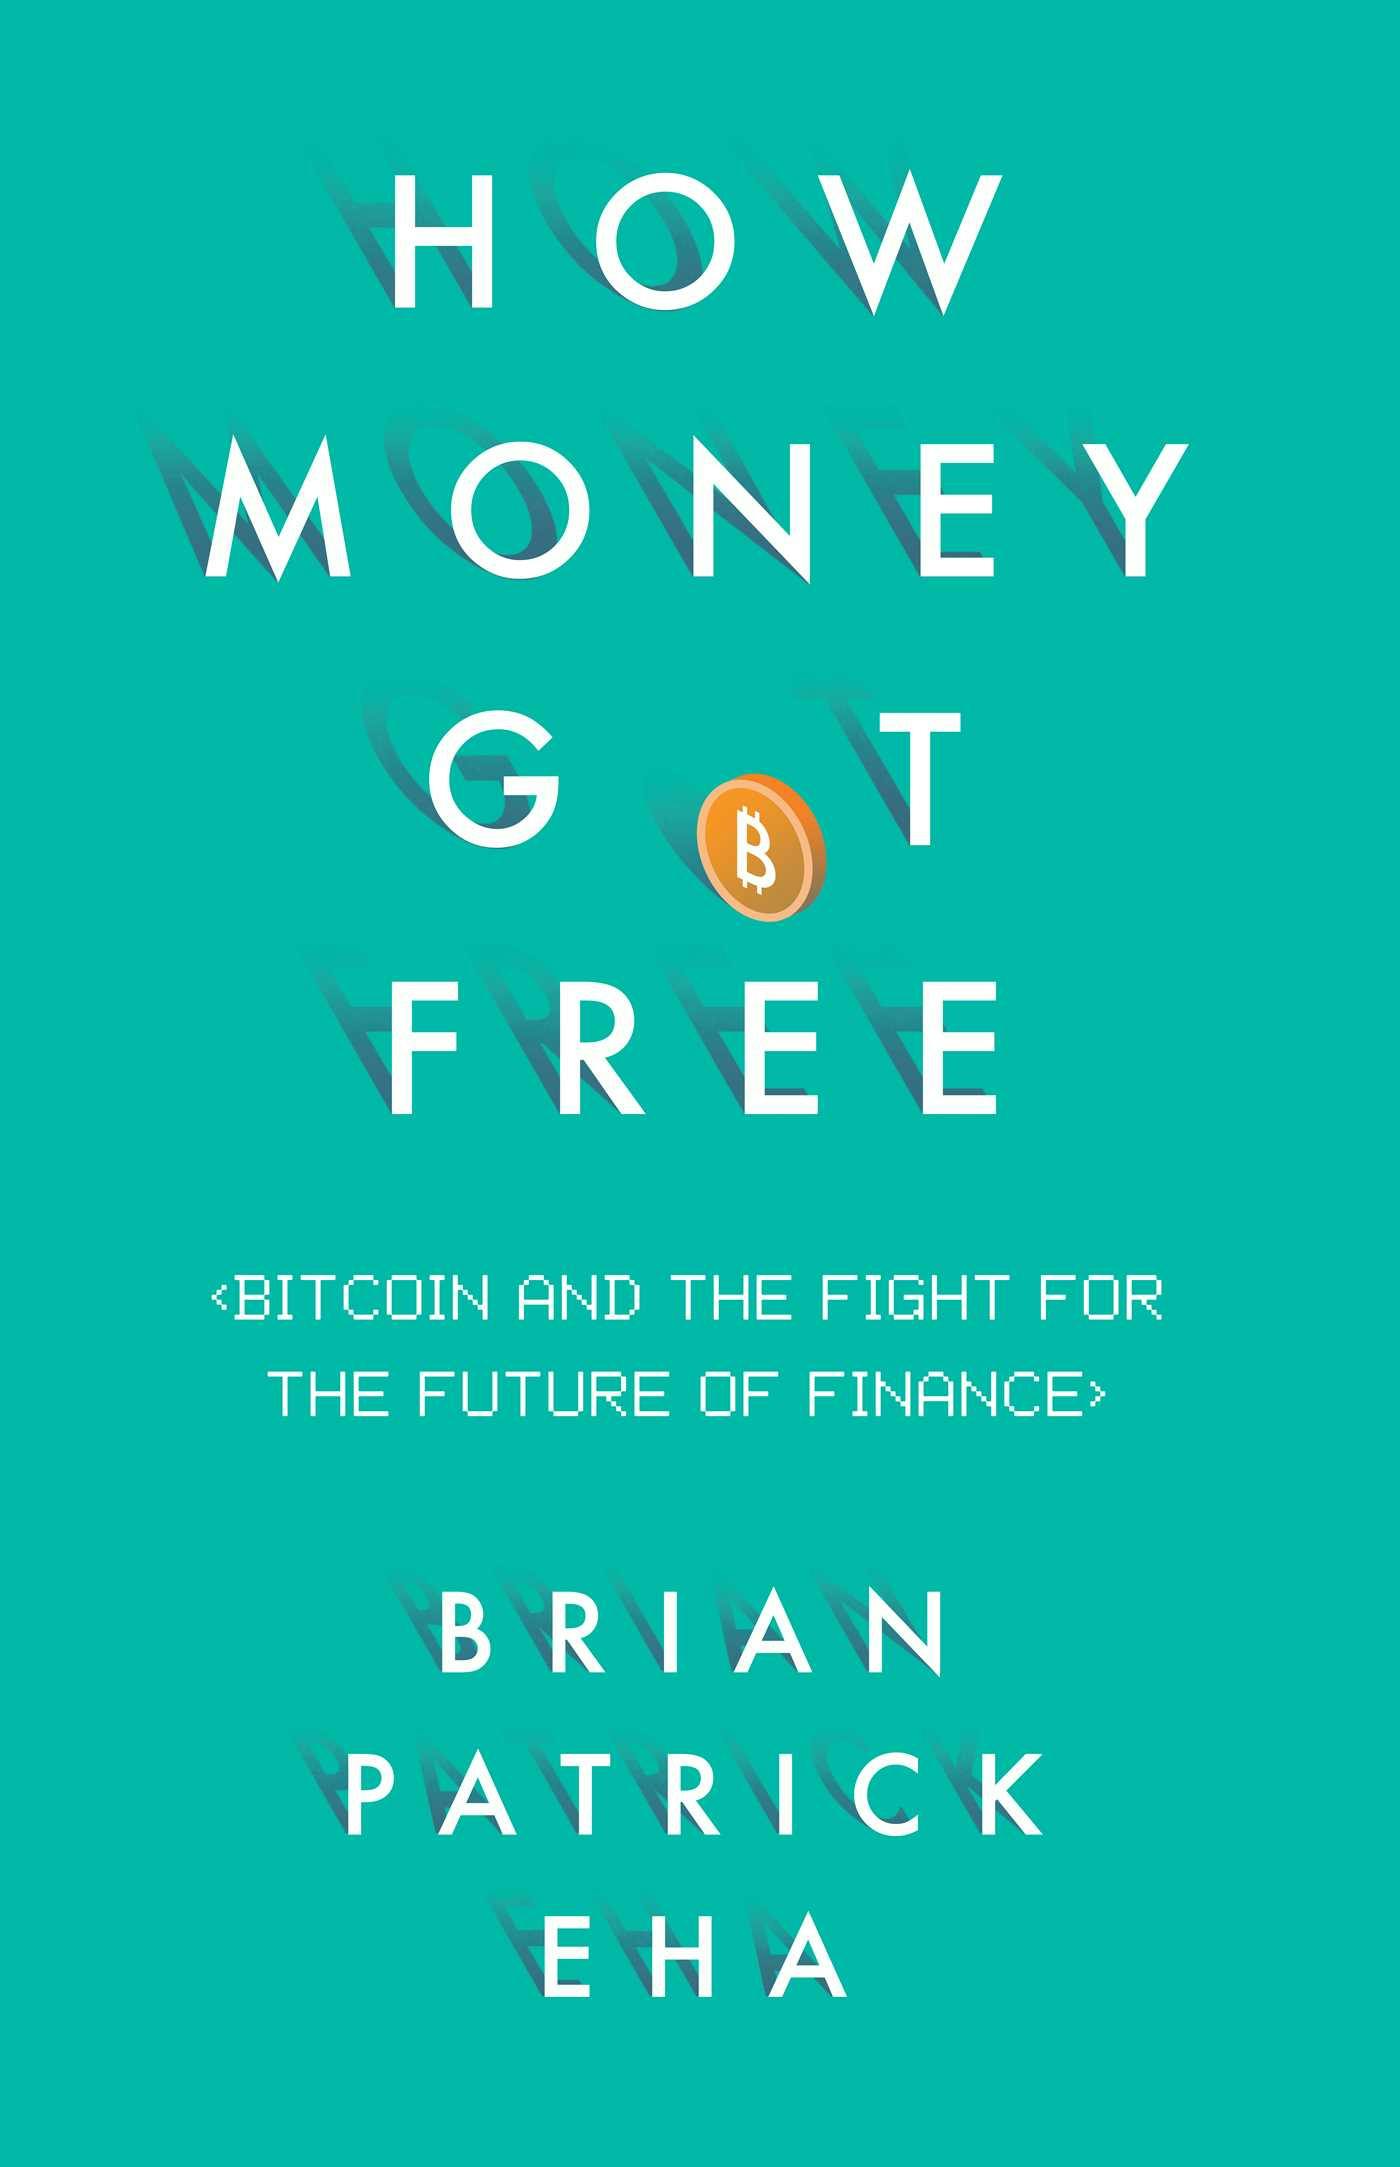 How Money Got Free: Bitcoin and the Fight for the Future of Finance - Brian Patrick Eha